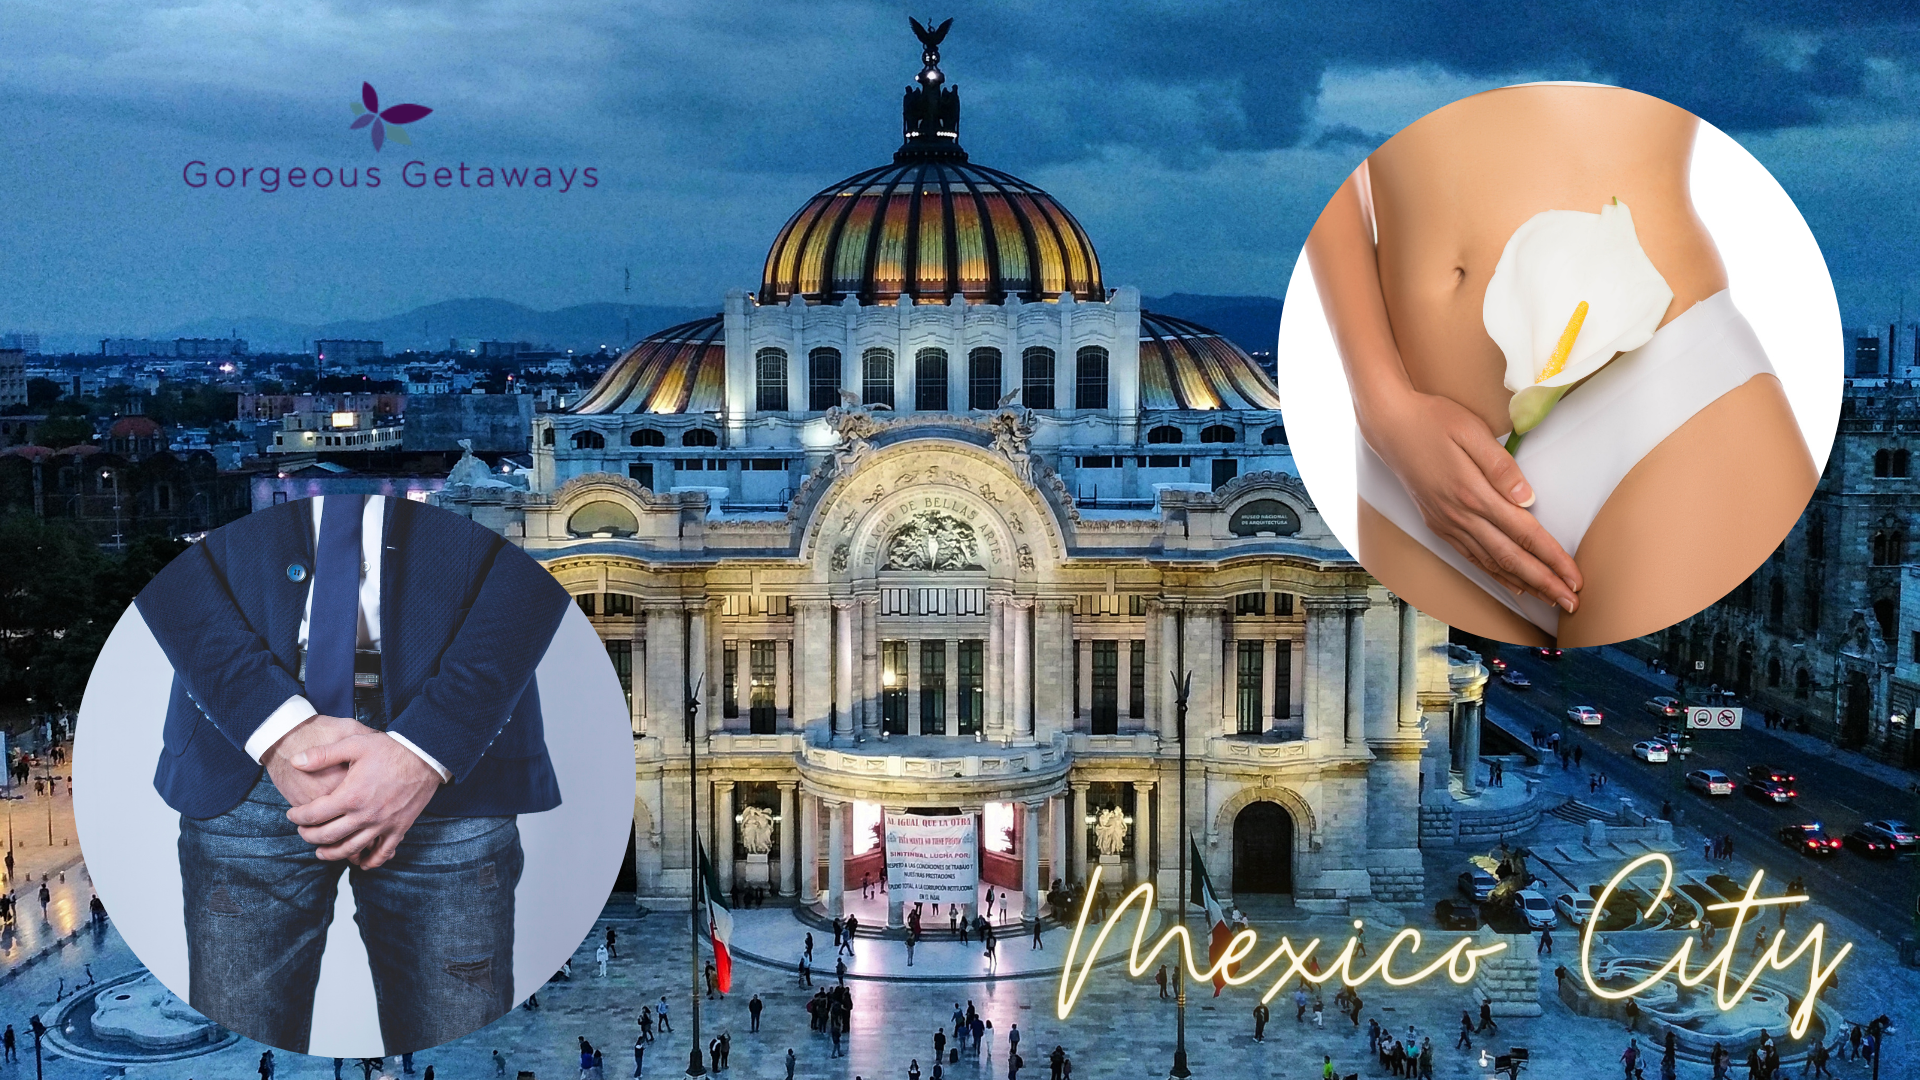 Vaginal Rejuvenation and Penoplasty in Mexico City